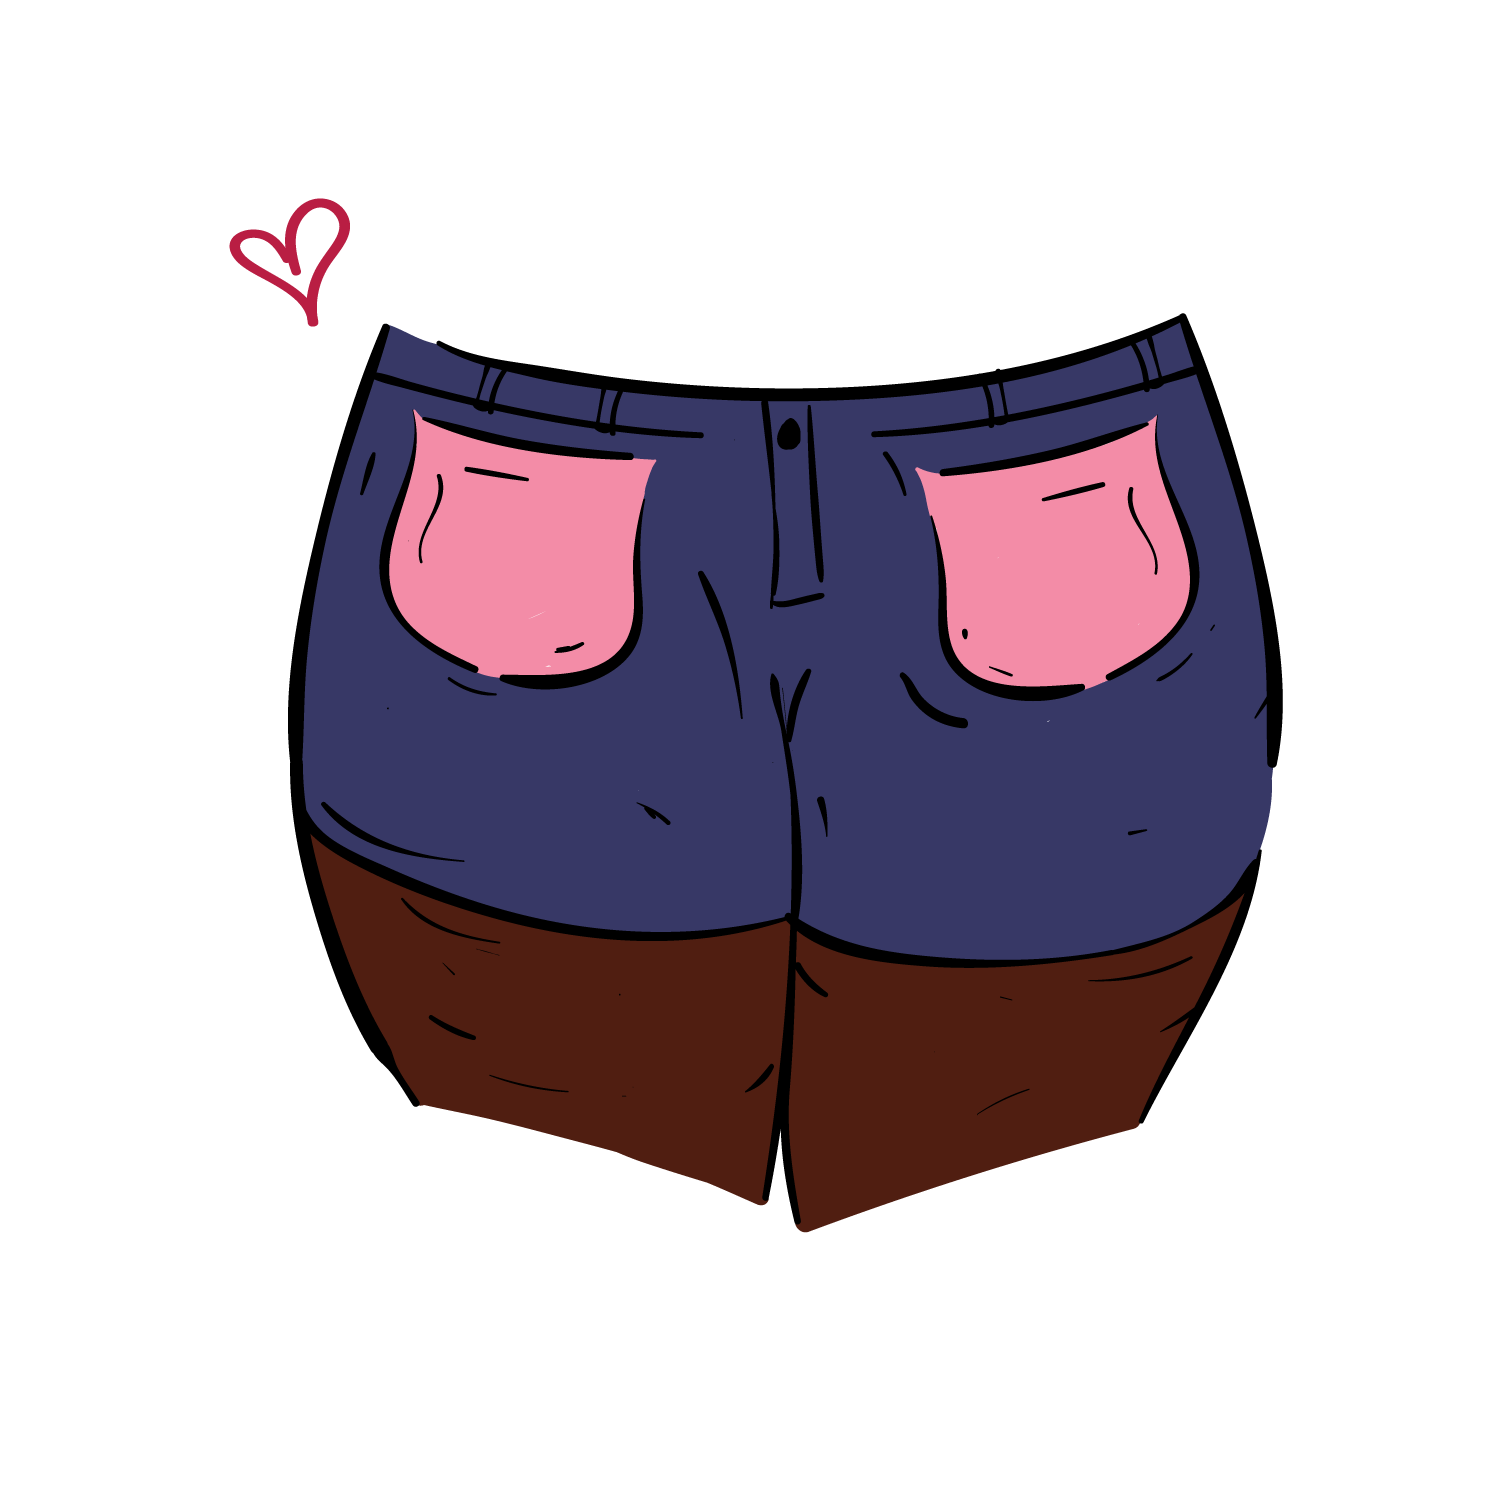 thicc thighs-09.png